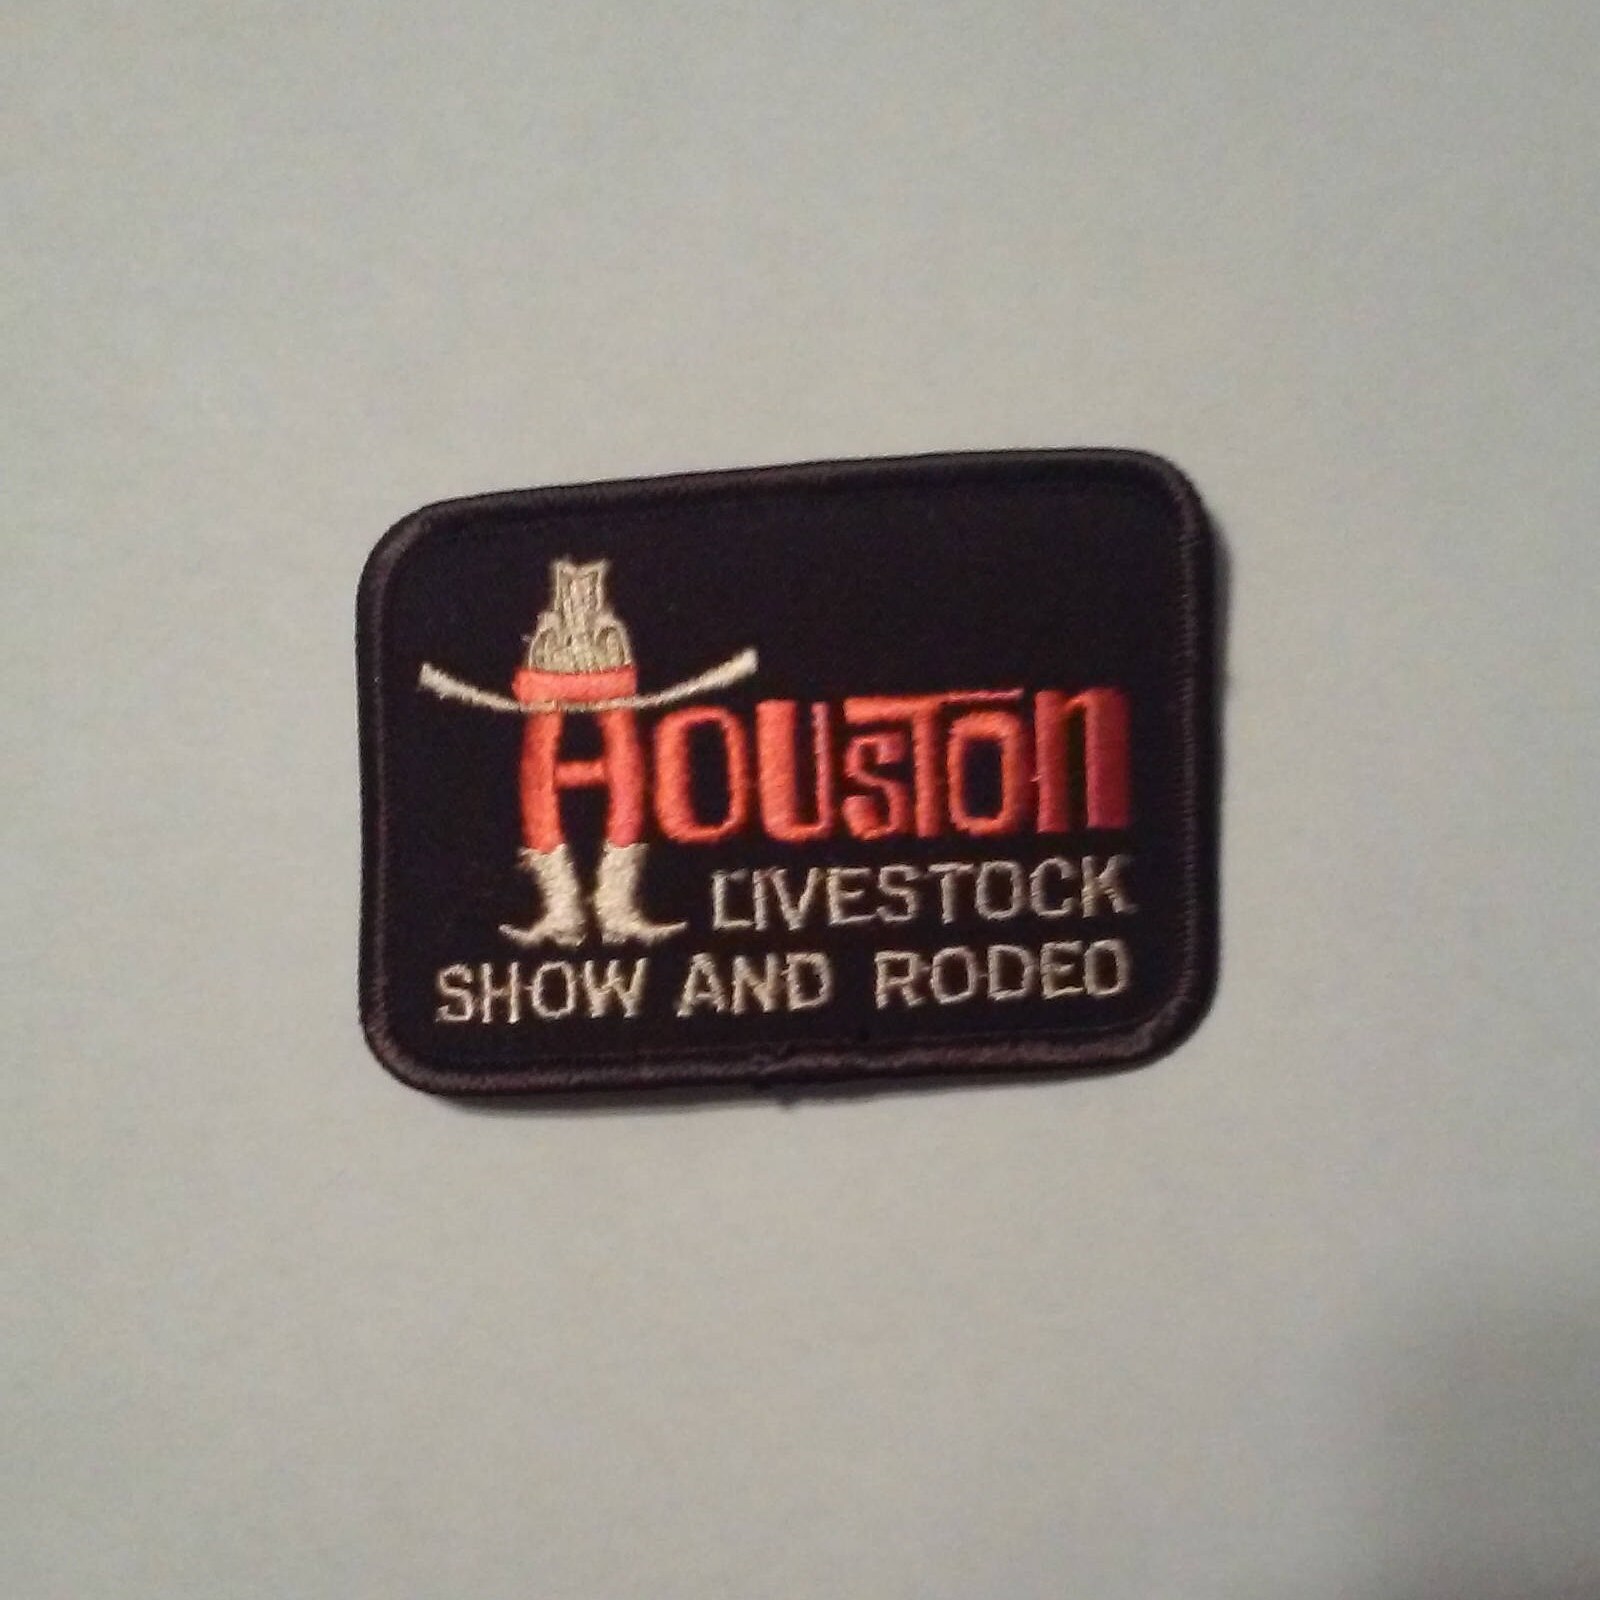 RODEO 2000 HOUSTON LIVESTOCK SHOW AND RODEO CLOTH IRON-ON PATCH 4X2.5" 